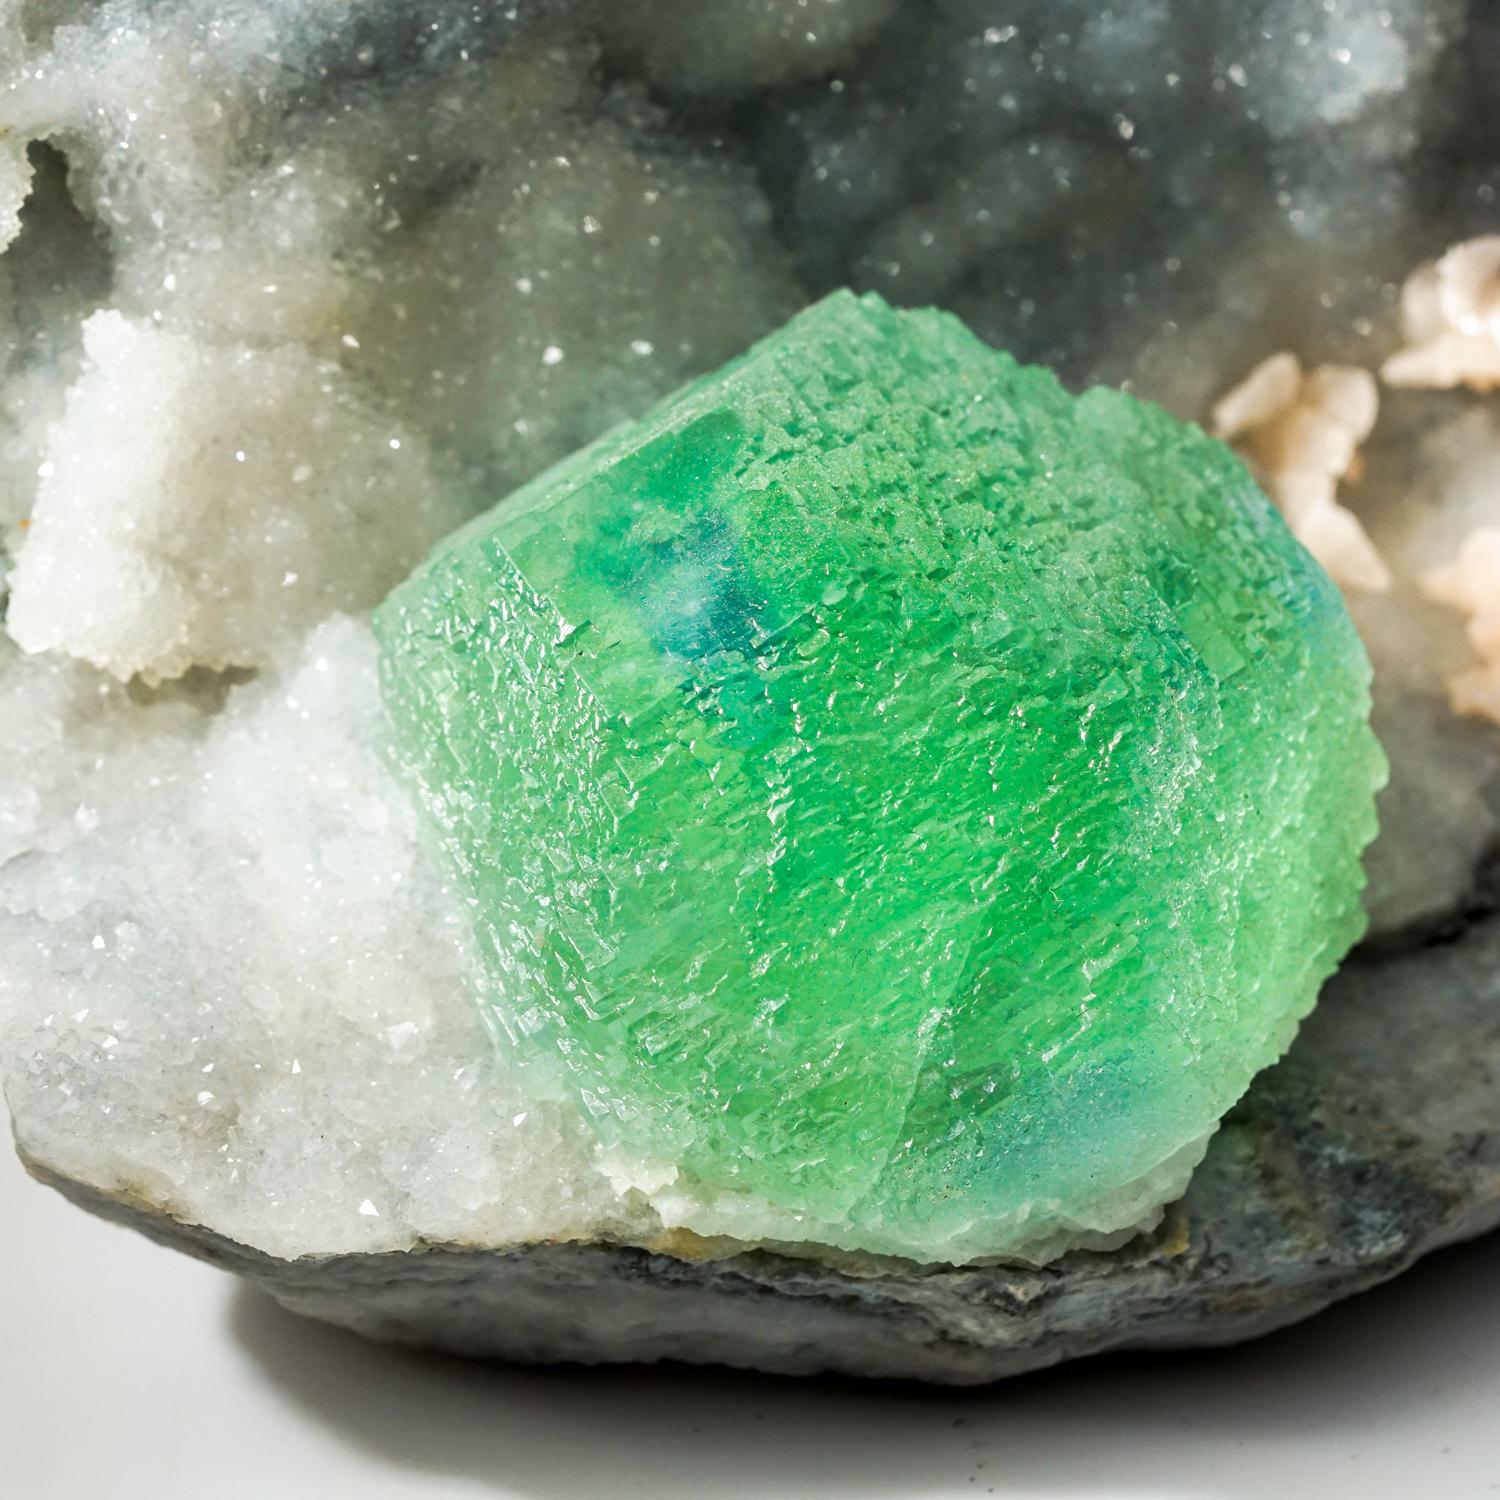 From Ruyuan, Lechang, Guandong, China

Large showy 1.5 inch gem green transparent fluorite crystal with blue phantom zoning at the center termination on matrix lined with scintillating quartz with peach dolomite crystals. The fluorite has lustrous